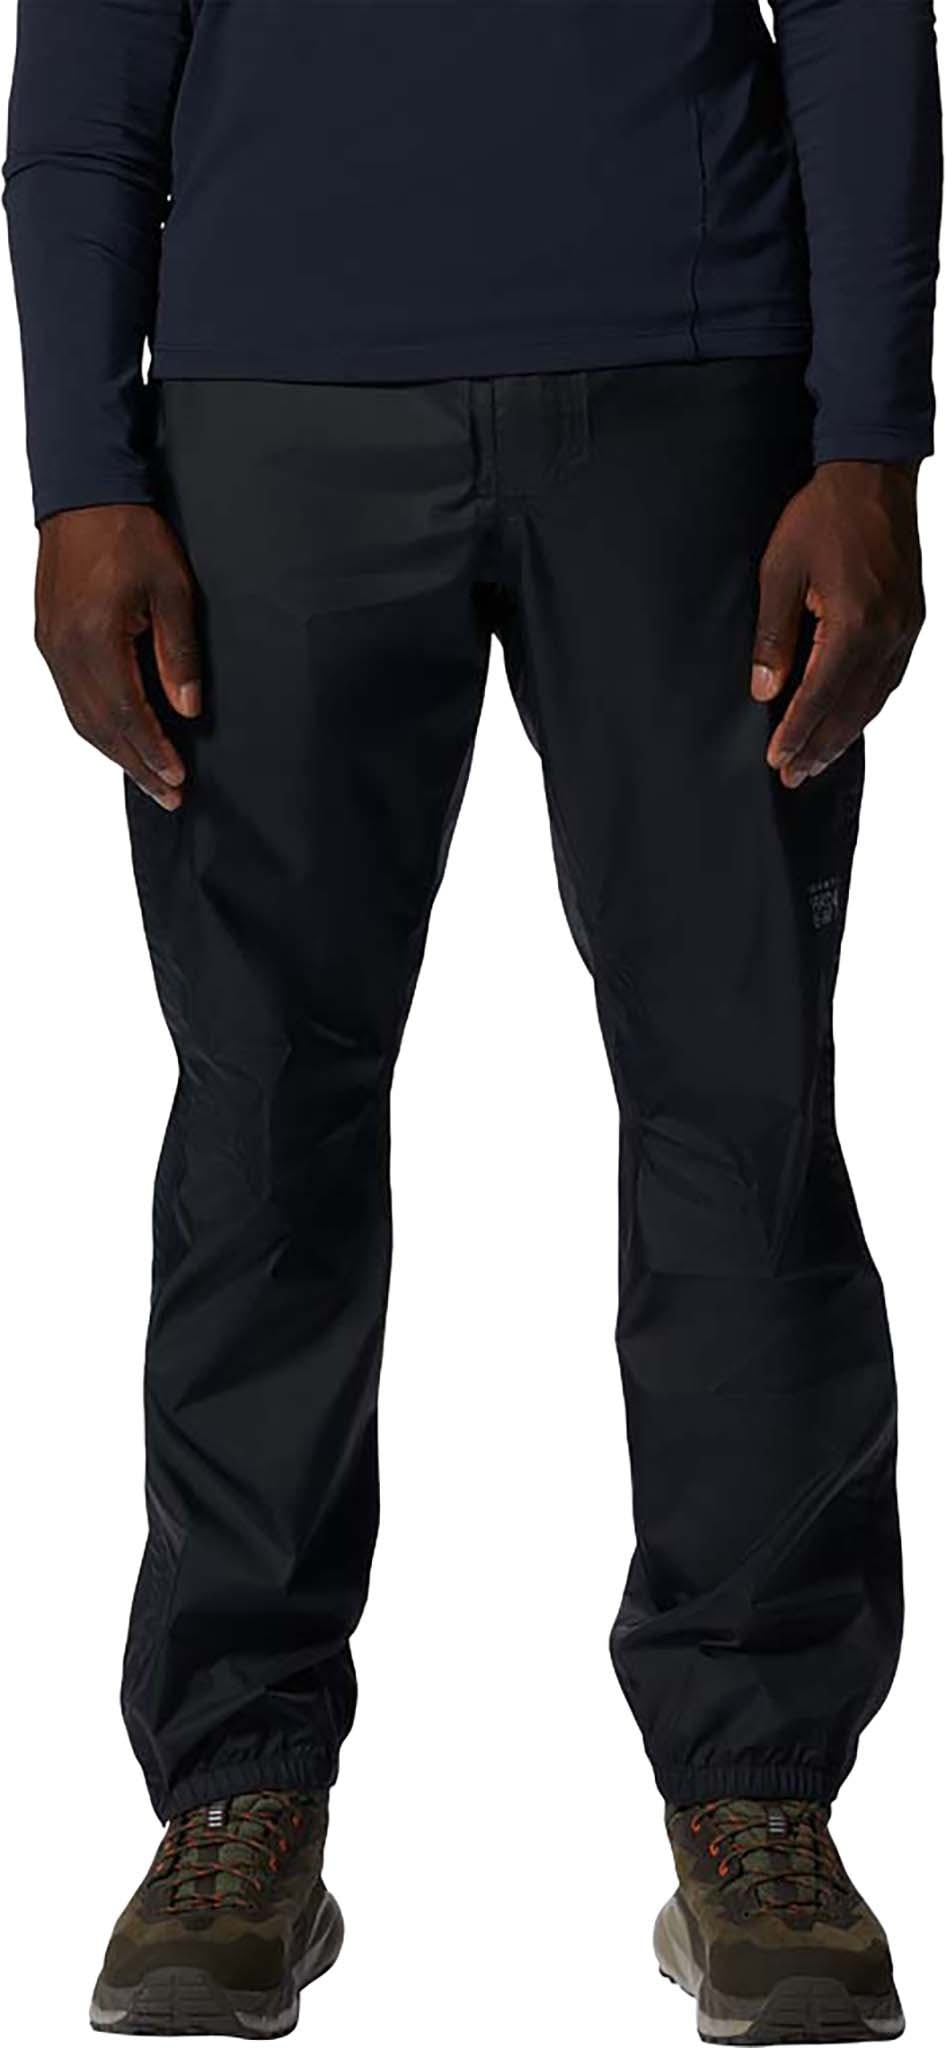 Product image for Threshold Pant - Men's